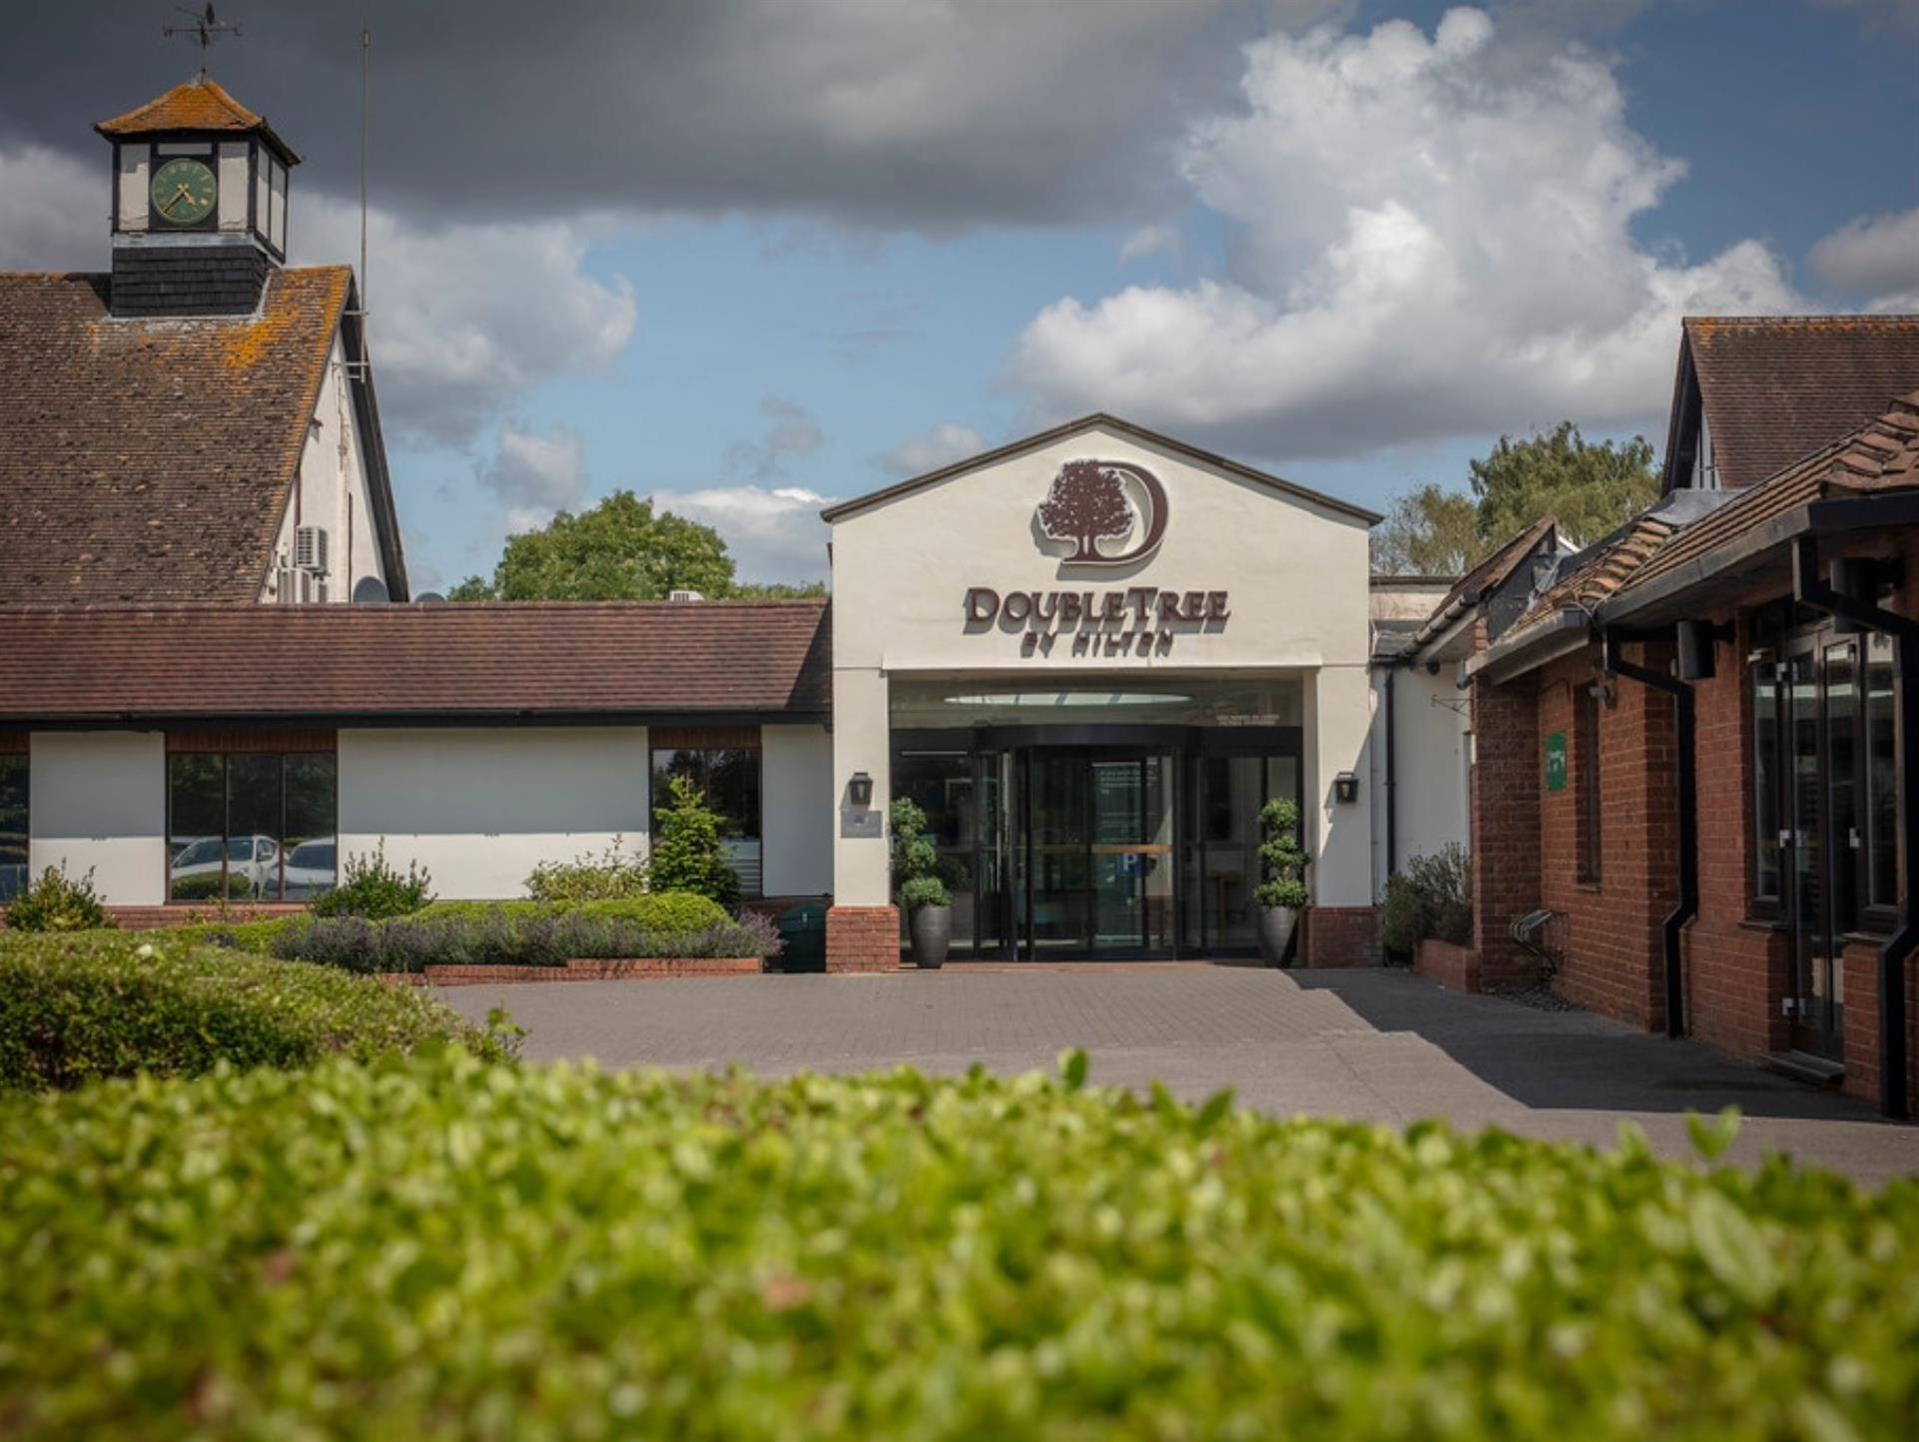 DoubleTree by Hilton Oxford Belfry in Thame, GB